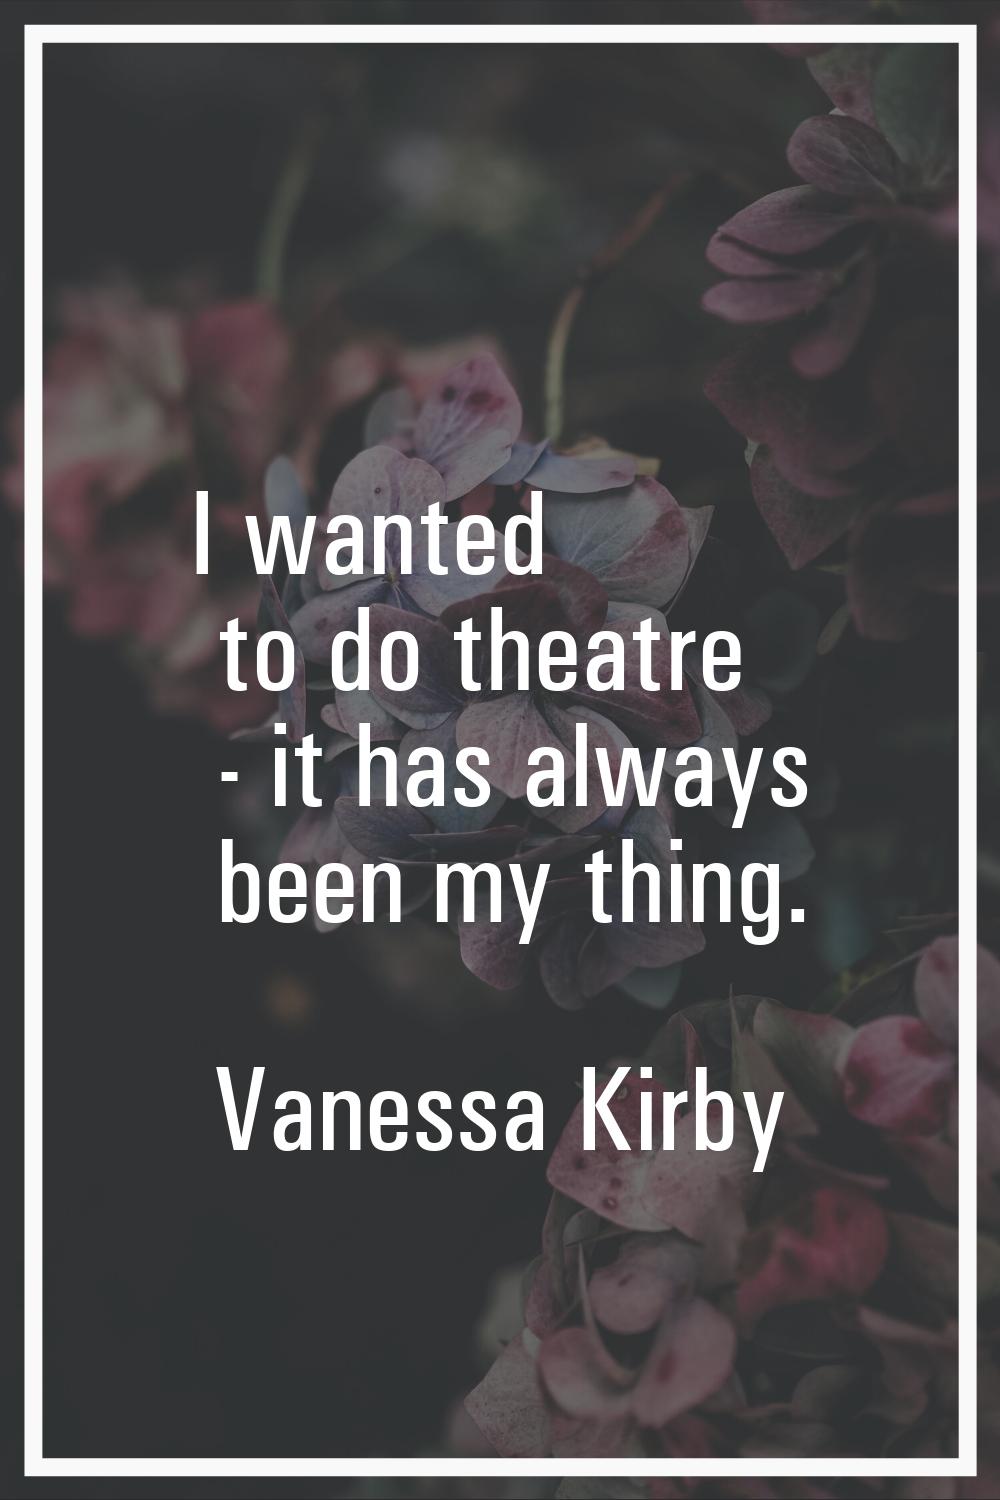 I wanted to do theatre - it has always been my thing.